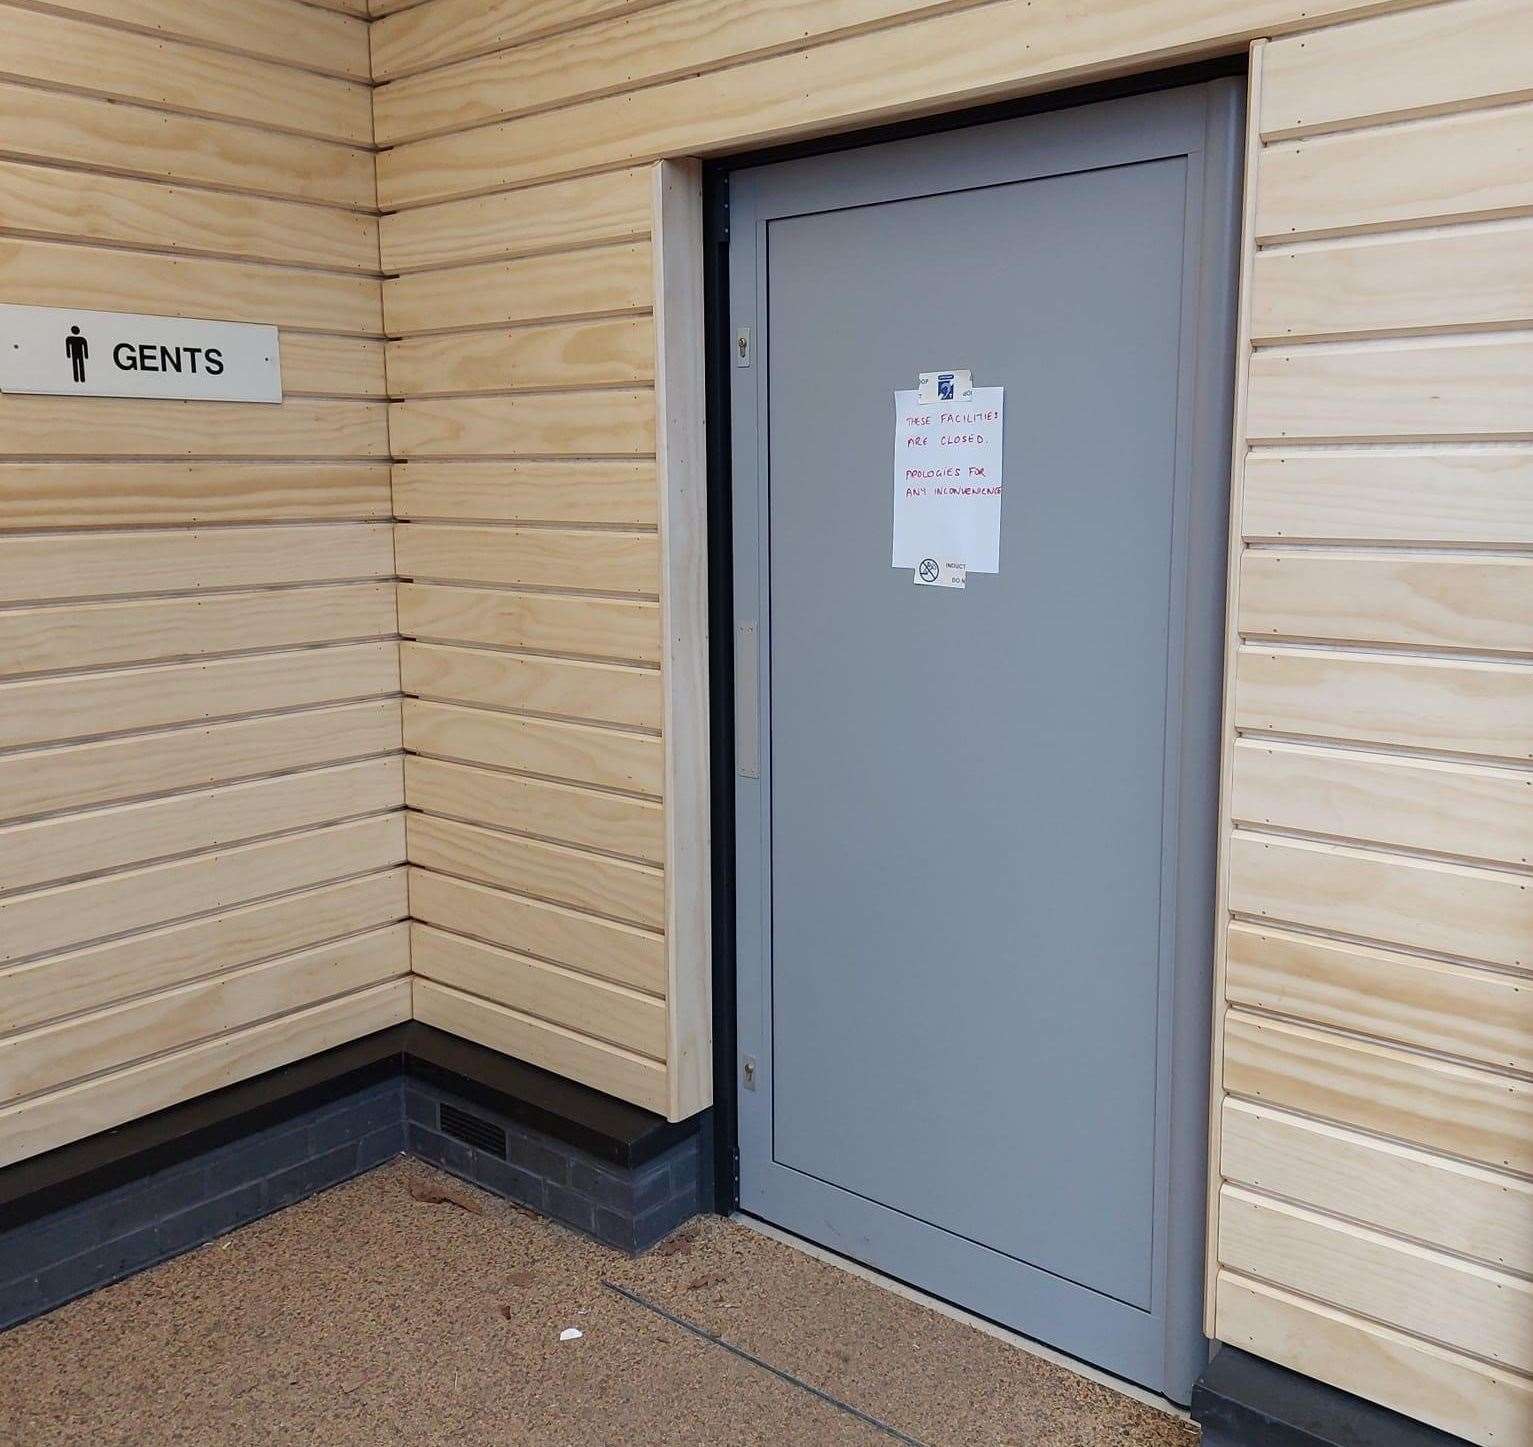 The new Mote Park toilets were temporarily shut. Picture: Jeff JB Curry